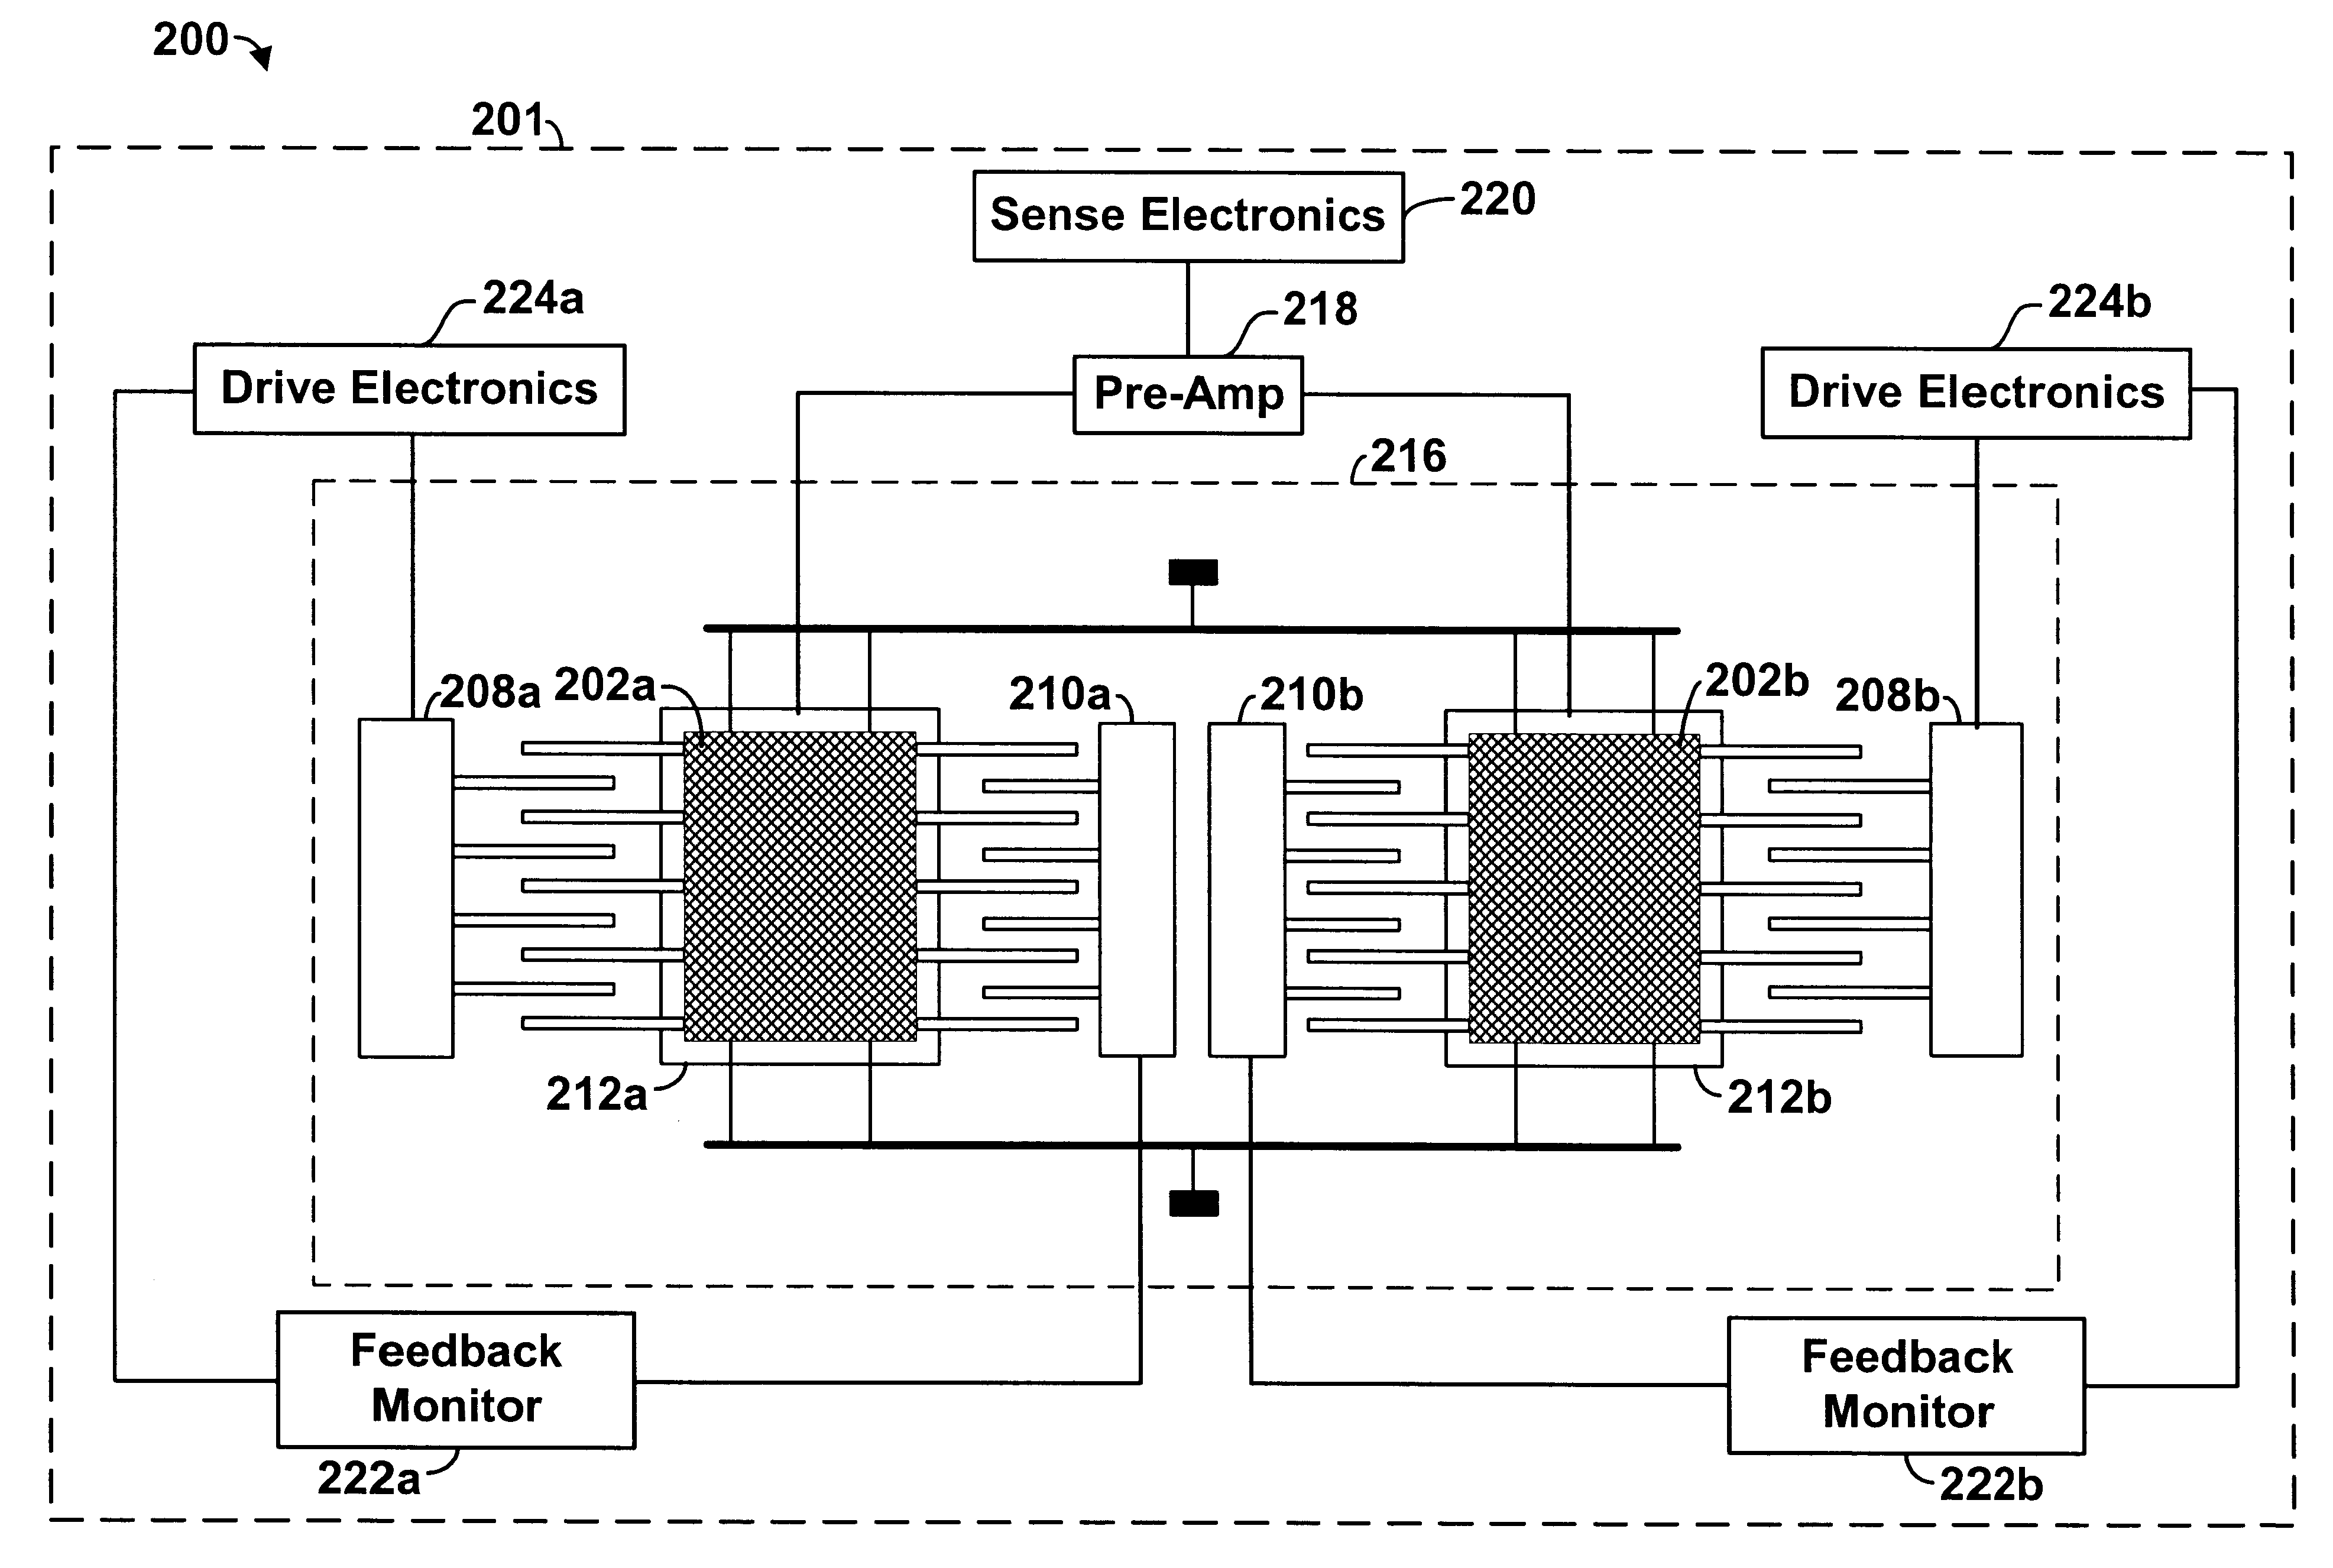 Cyrogenic inertial micro-electro-mechanical system (MEMS) device